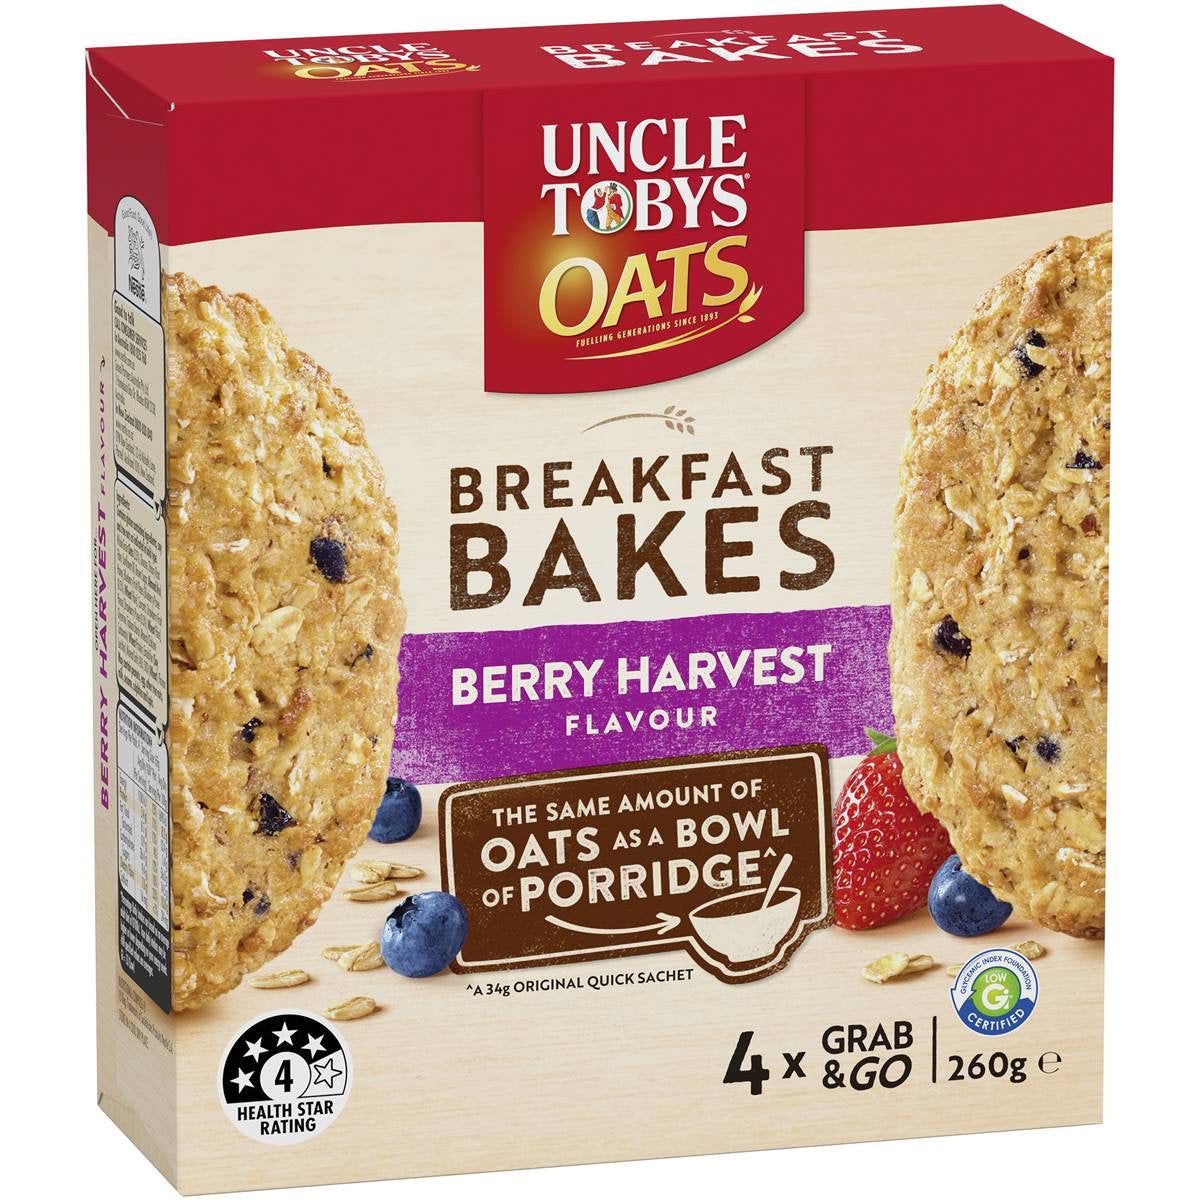 Uncle Tobys Oats Breakfast Bakes Cereal Bar Berry Harvest 260g